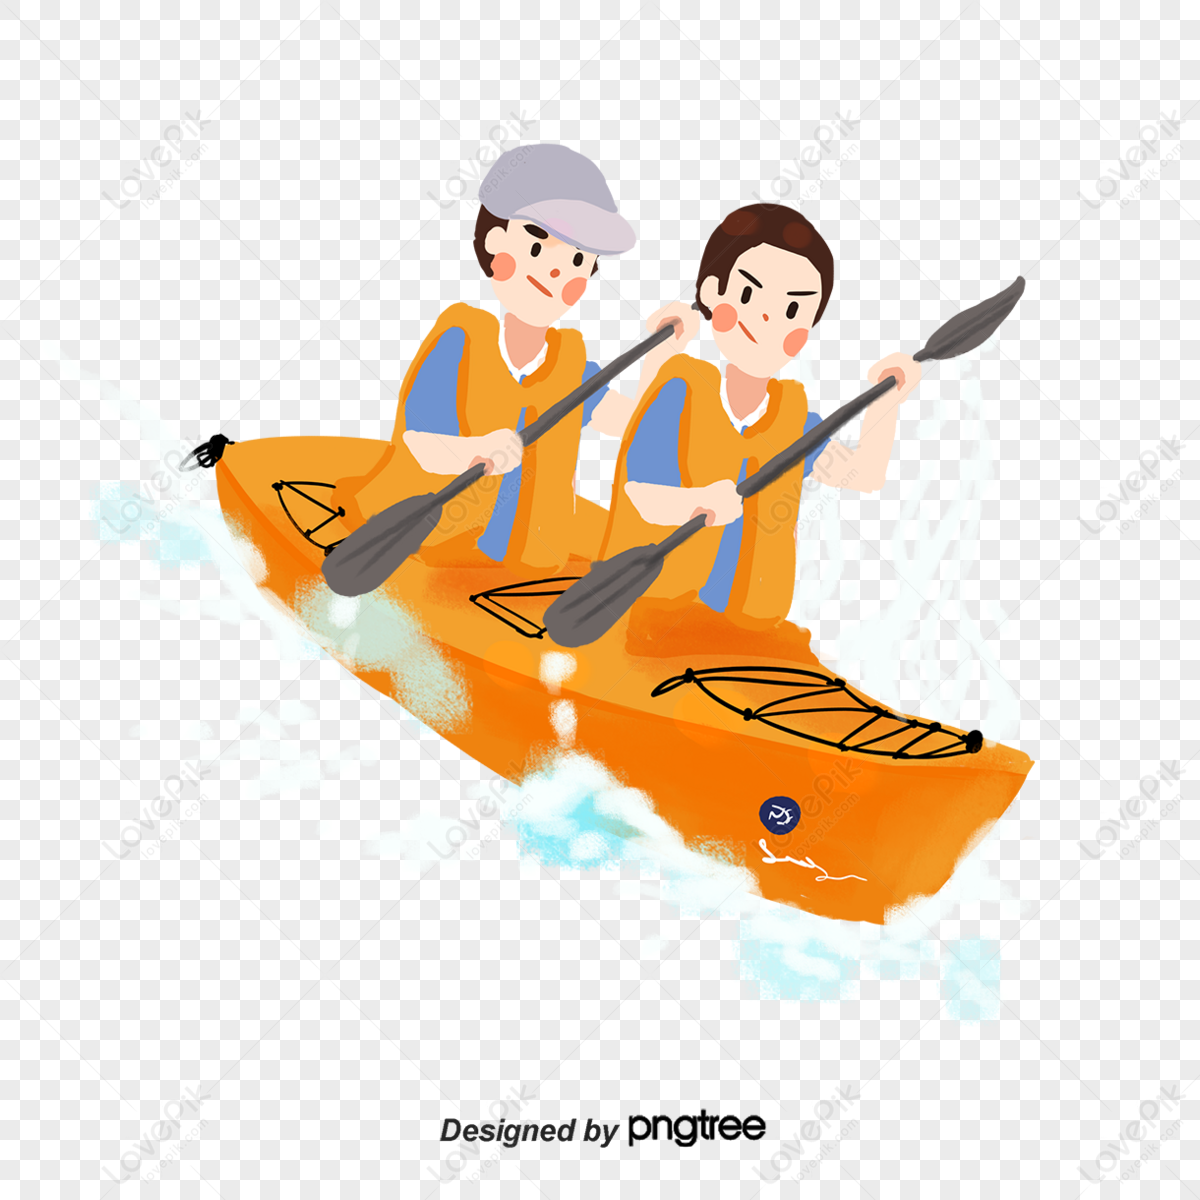 Hand-painted cartoon character rafting boat,ship,sports,match png hd transparent image